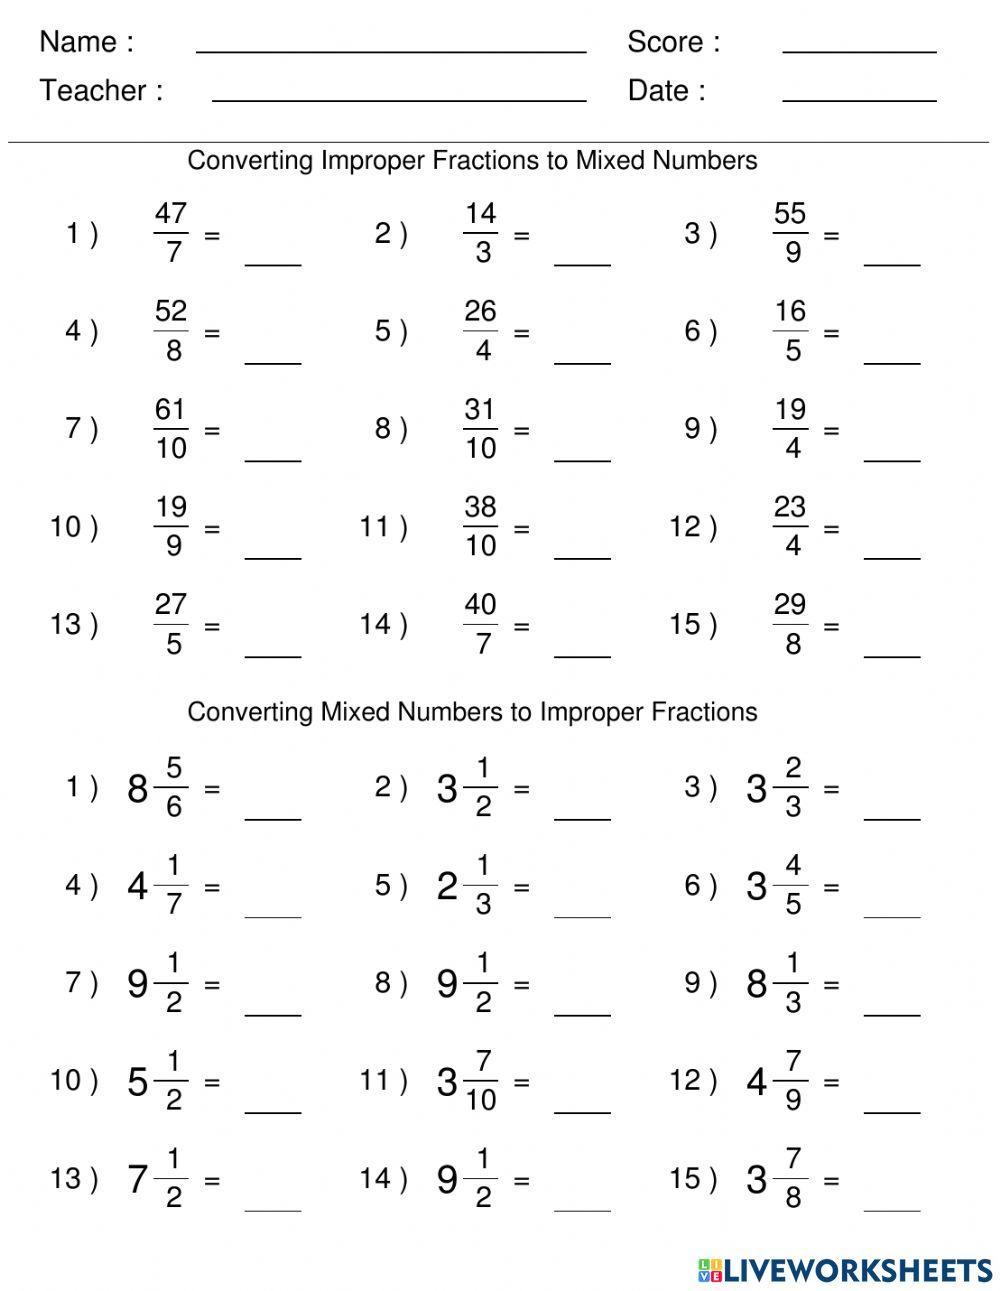 Converting Improper and Mixed Fractions